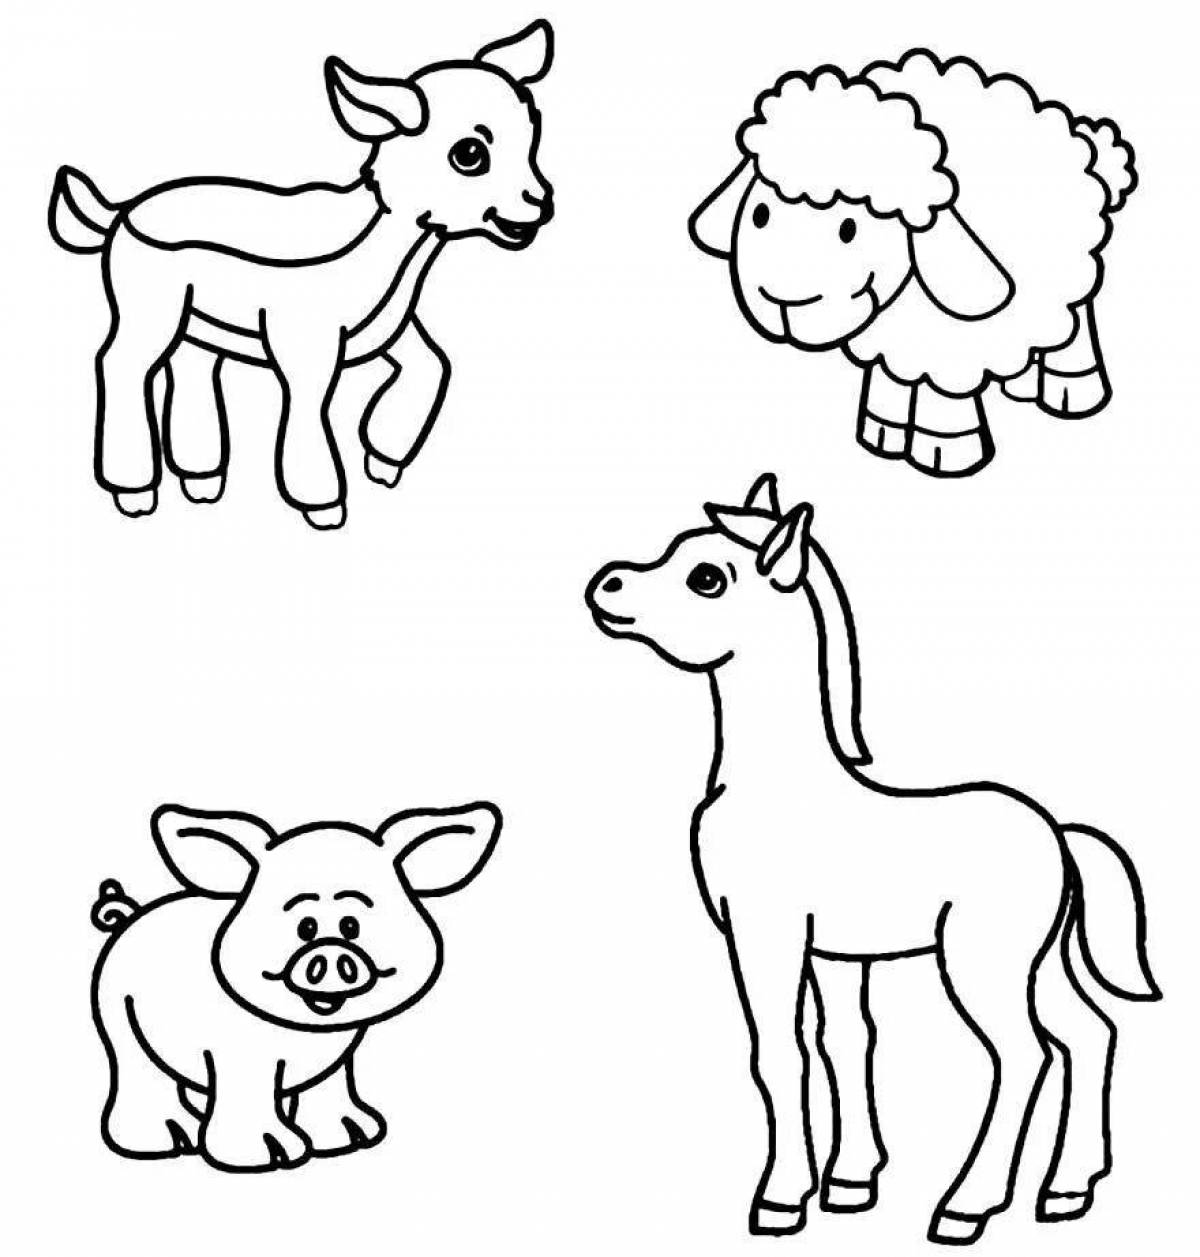 Coloring page friendly pets